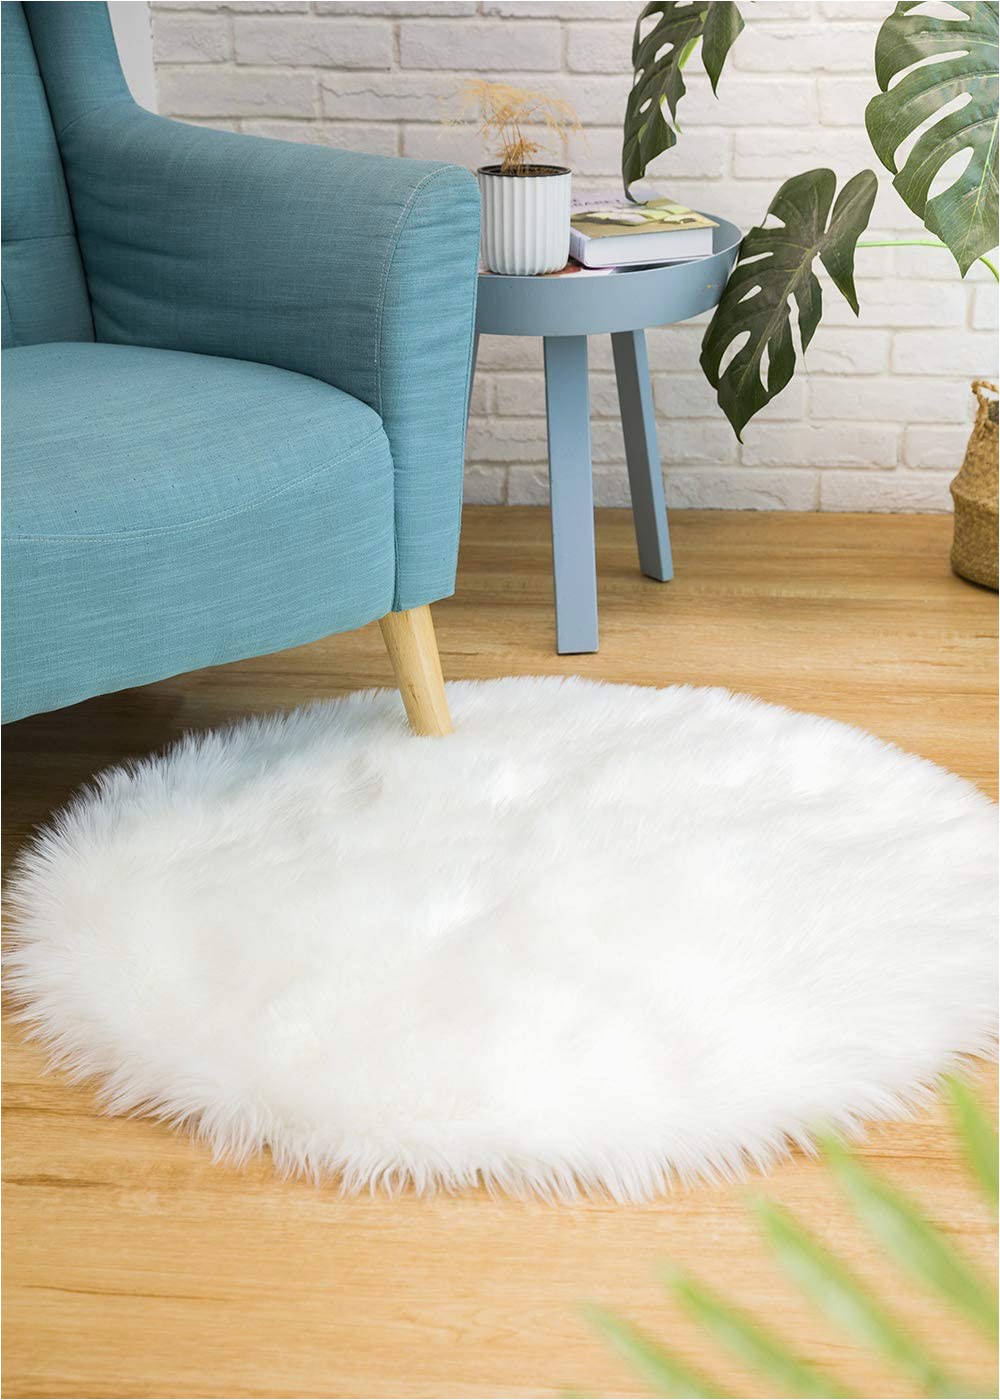 White Fluffy area Rug 8×10 Ciicool soft Faux Sheepskin Fur area Rugs Round Fluffy Rugs for Bedroom Silky Fuzzy Carpet Furry Rug for Living Room Girls Rooms White 3 X 3 Feet